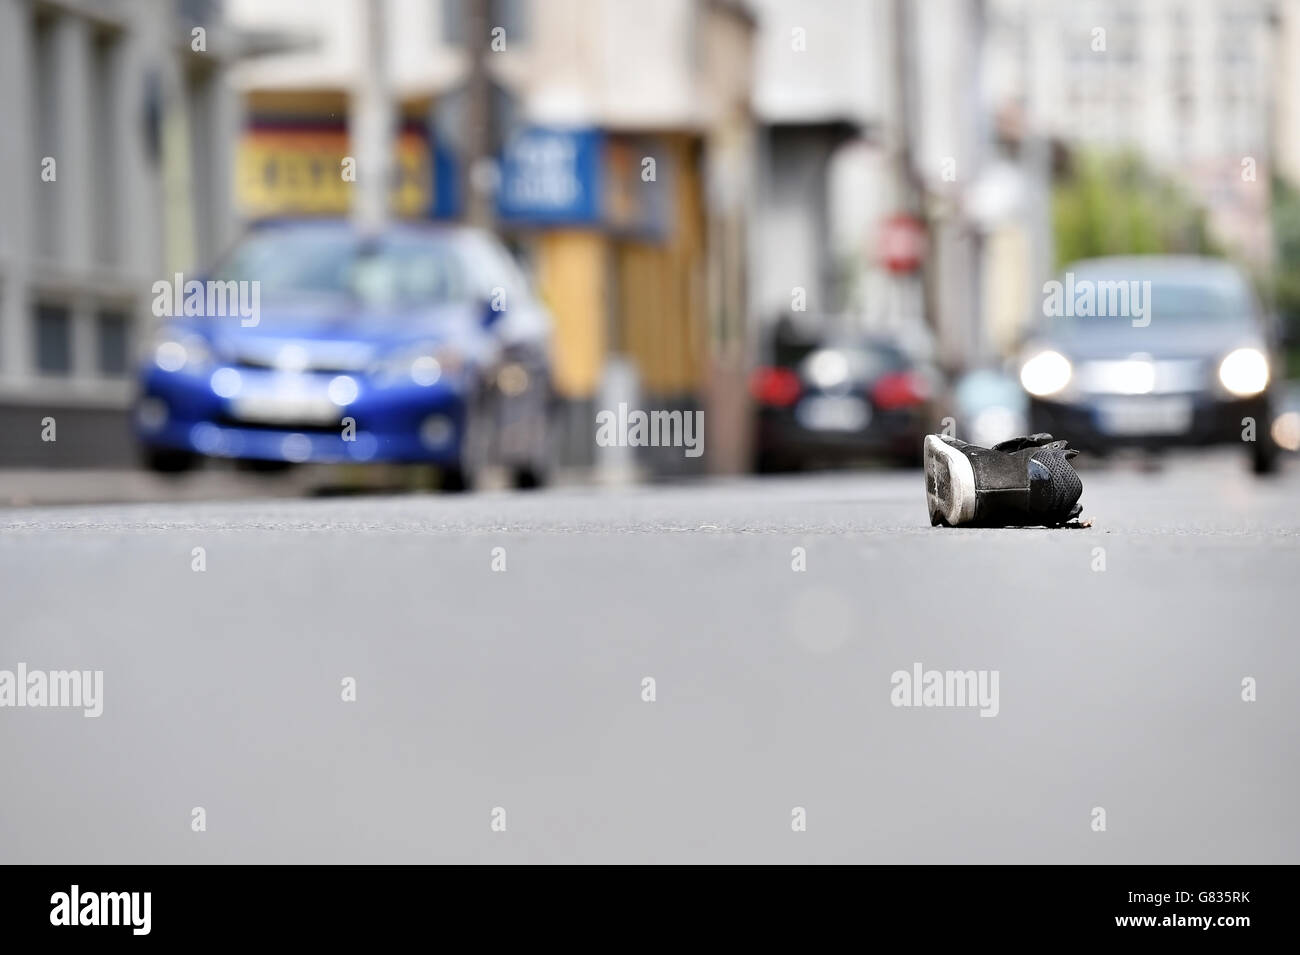 Shoe on the street with cars in background after victim was hit by vehicle Stock Photo